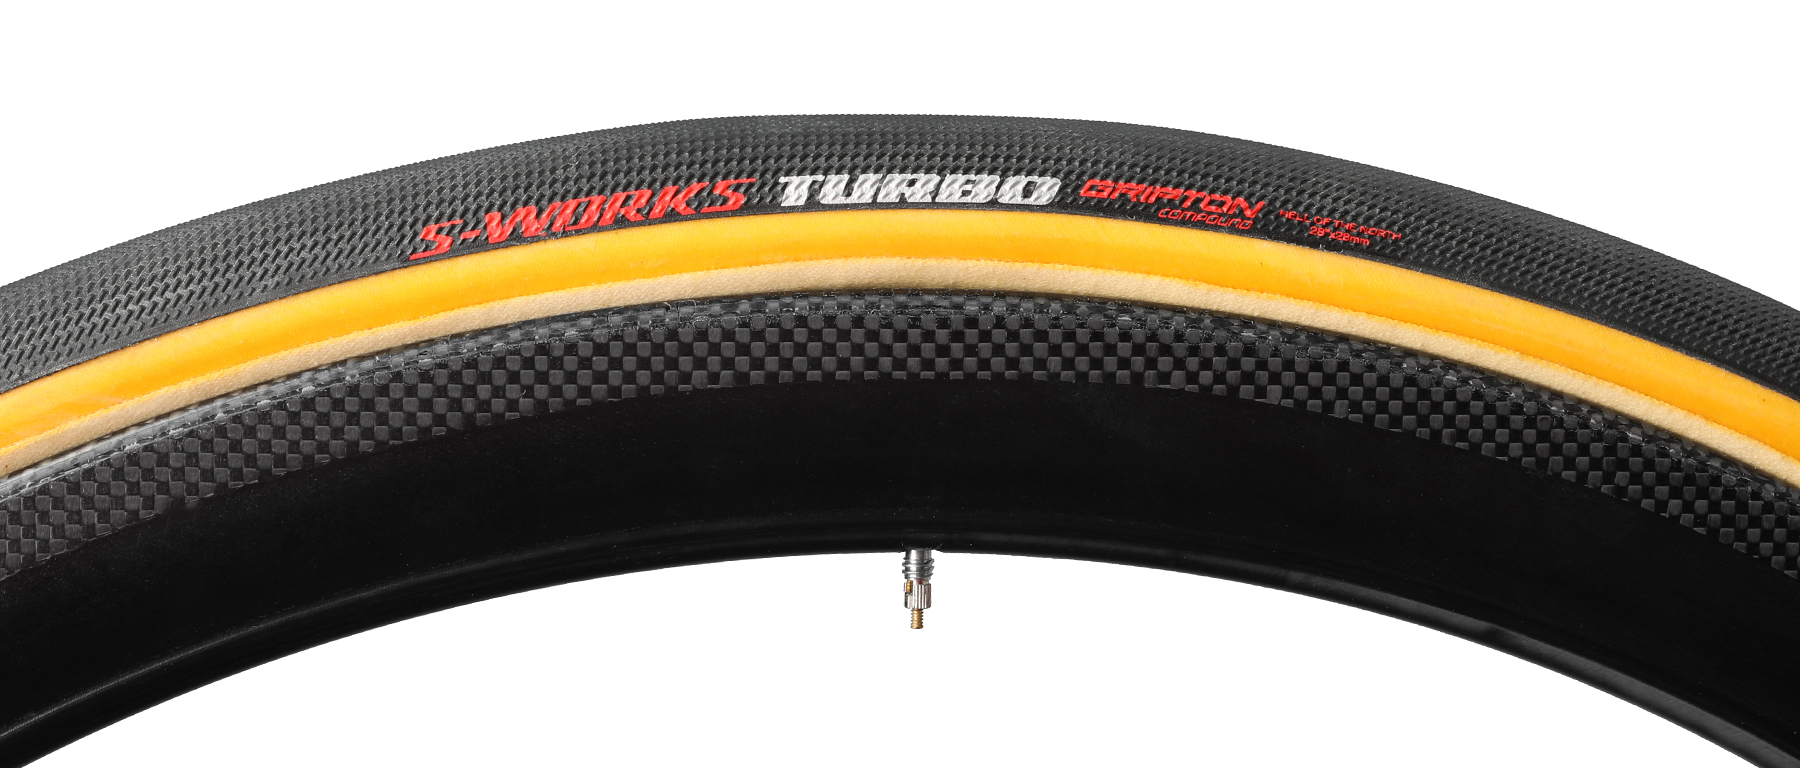 Specialized S-Works Cotton Hell of the North Tubular Tire